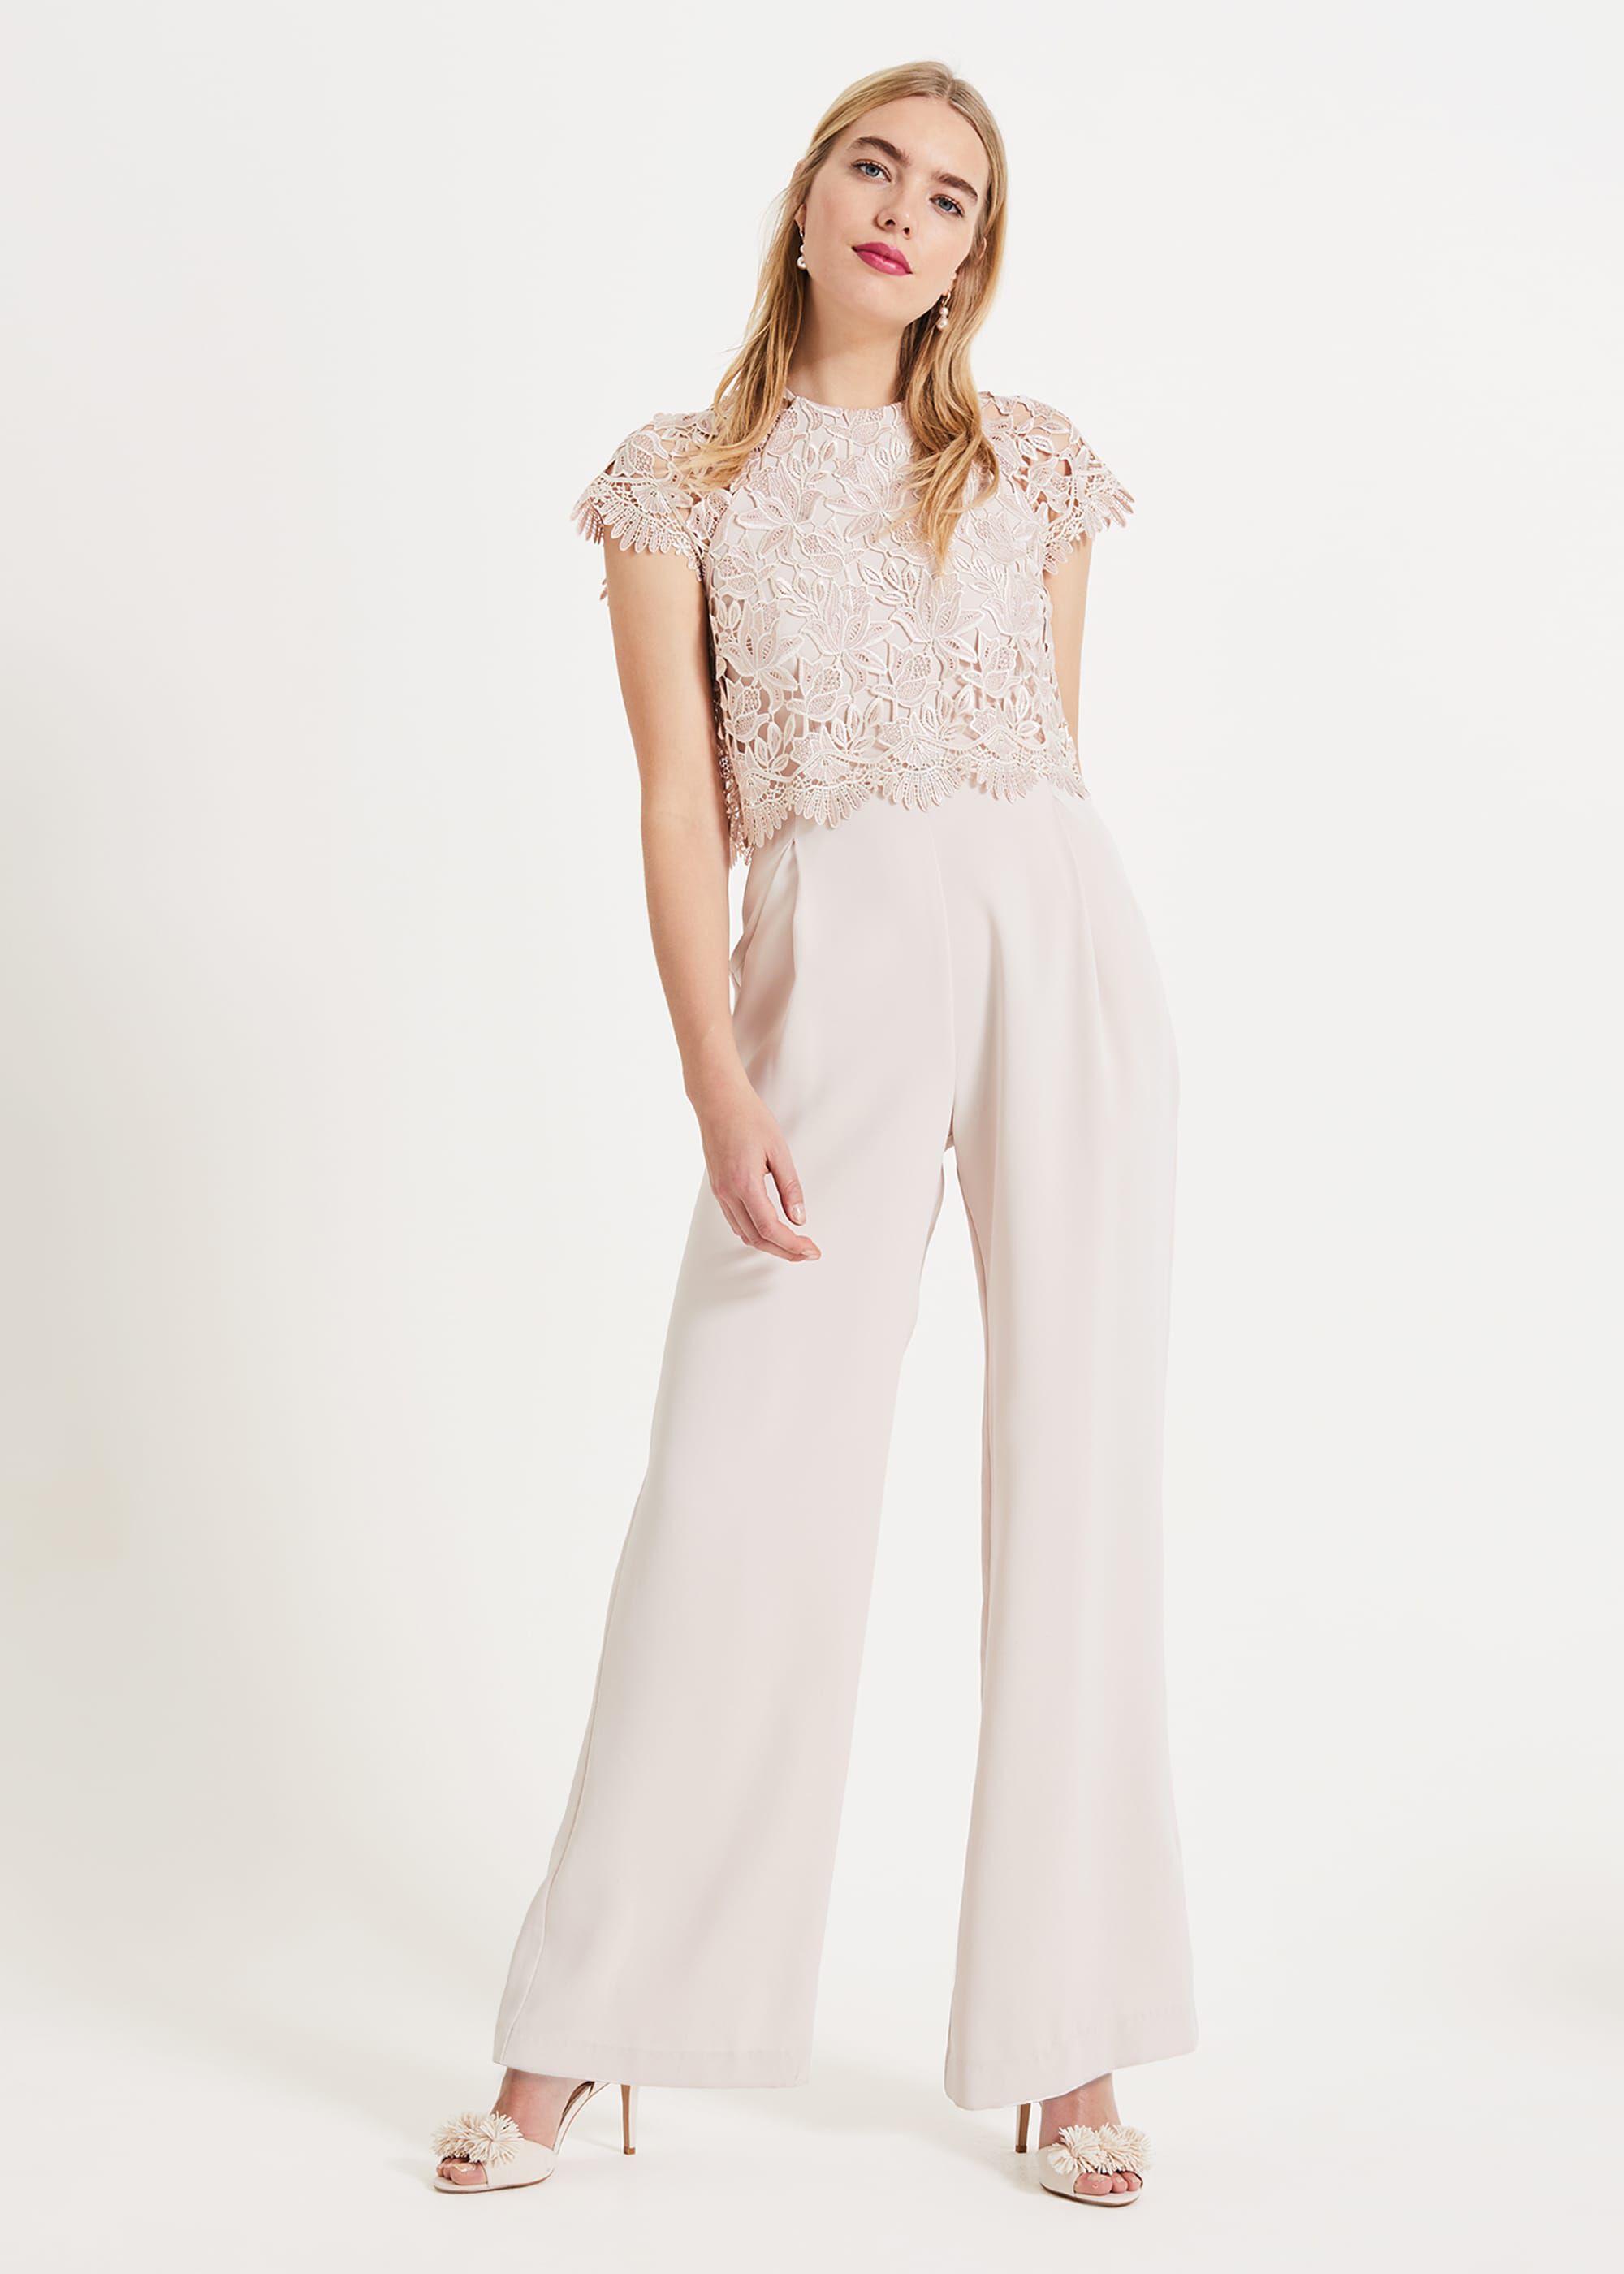 Phase Eight Pantsuit Shop, 47% OFF | www.angloamericancentre.it